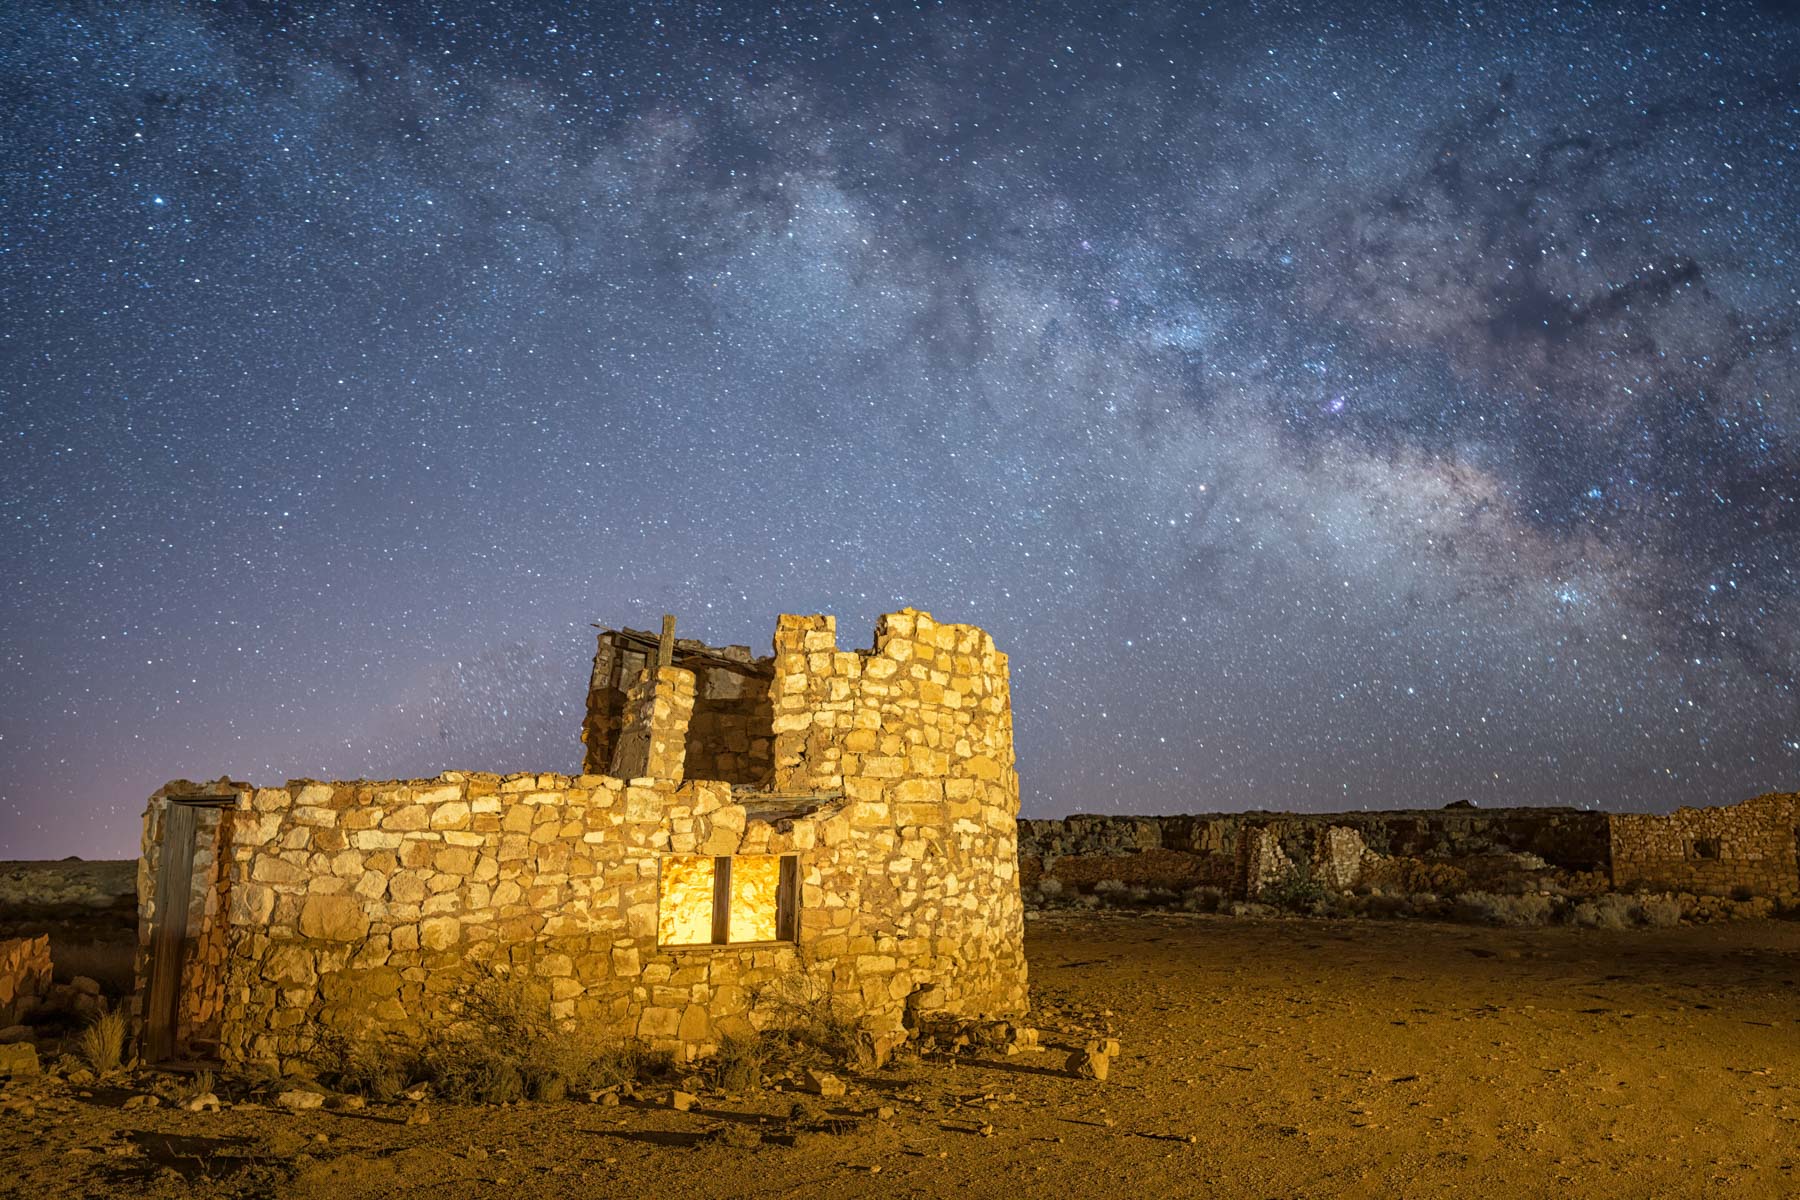 Milky Way over Round House in Two Guns ghost town, Arizona